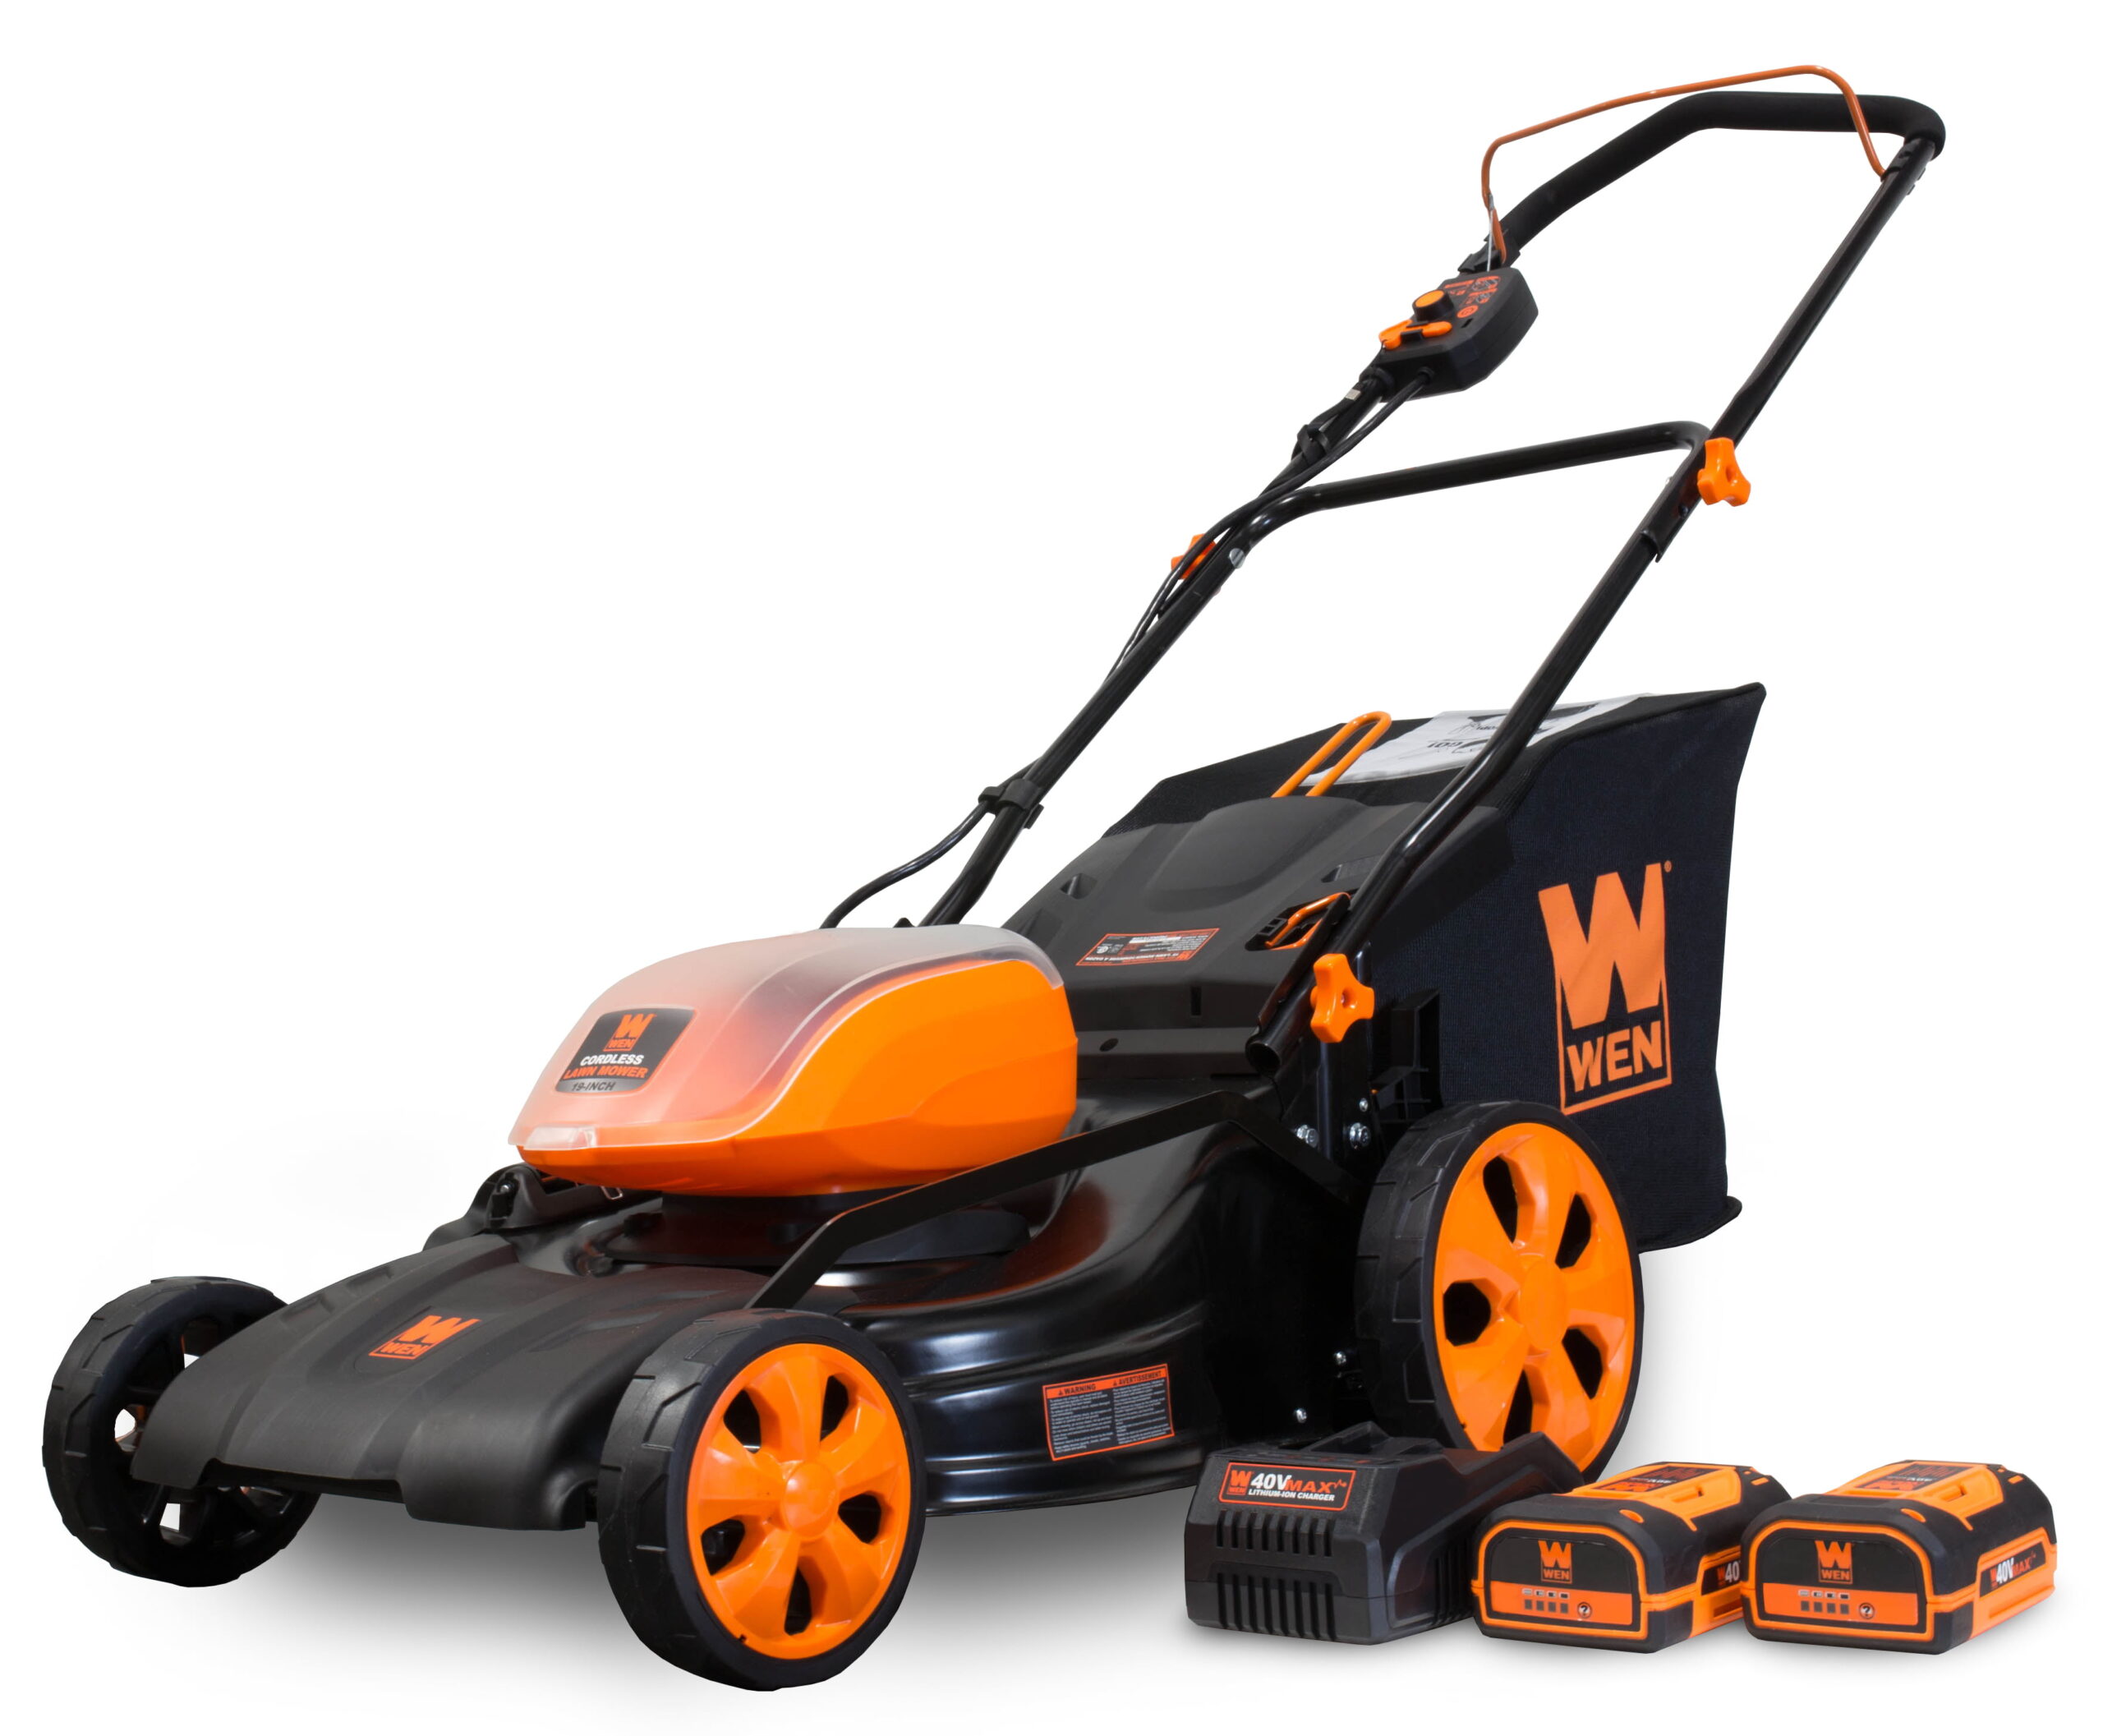 WEN 40V Max Lithium Ion 19-Inch Cordless 3-in-1 Lawn Mower with